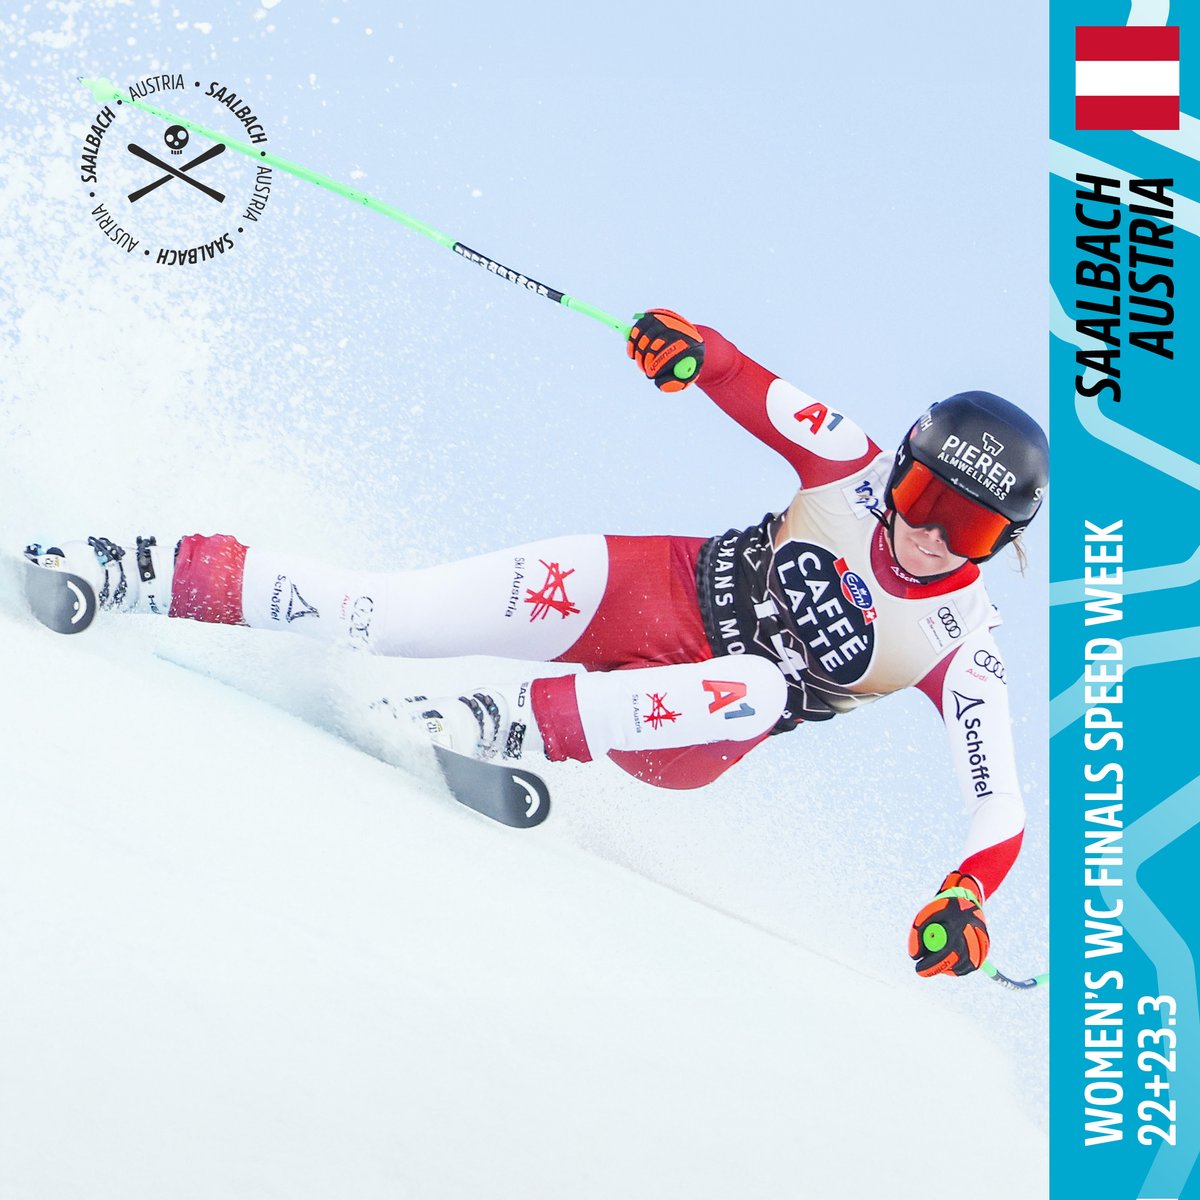 World Cup Finals Speed Week in Saalbach Hinterglemm coming up. Conny Huetter has already won a Super G this winter, so looking forward racing in front of her home fans in Austria.